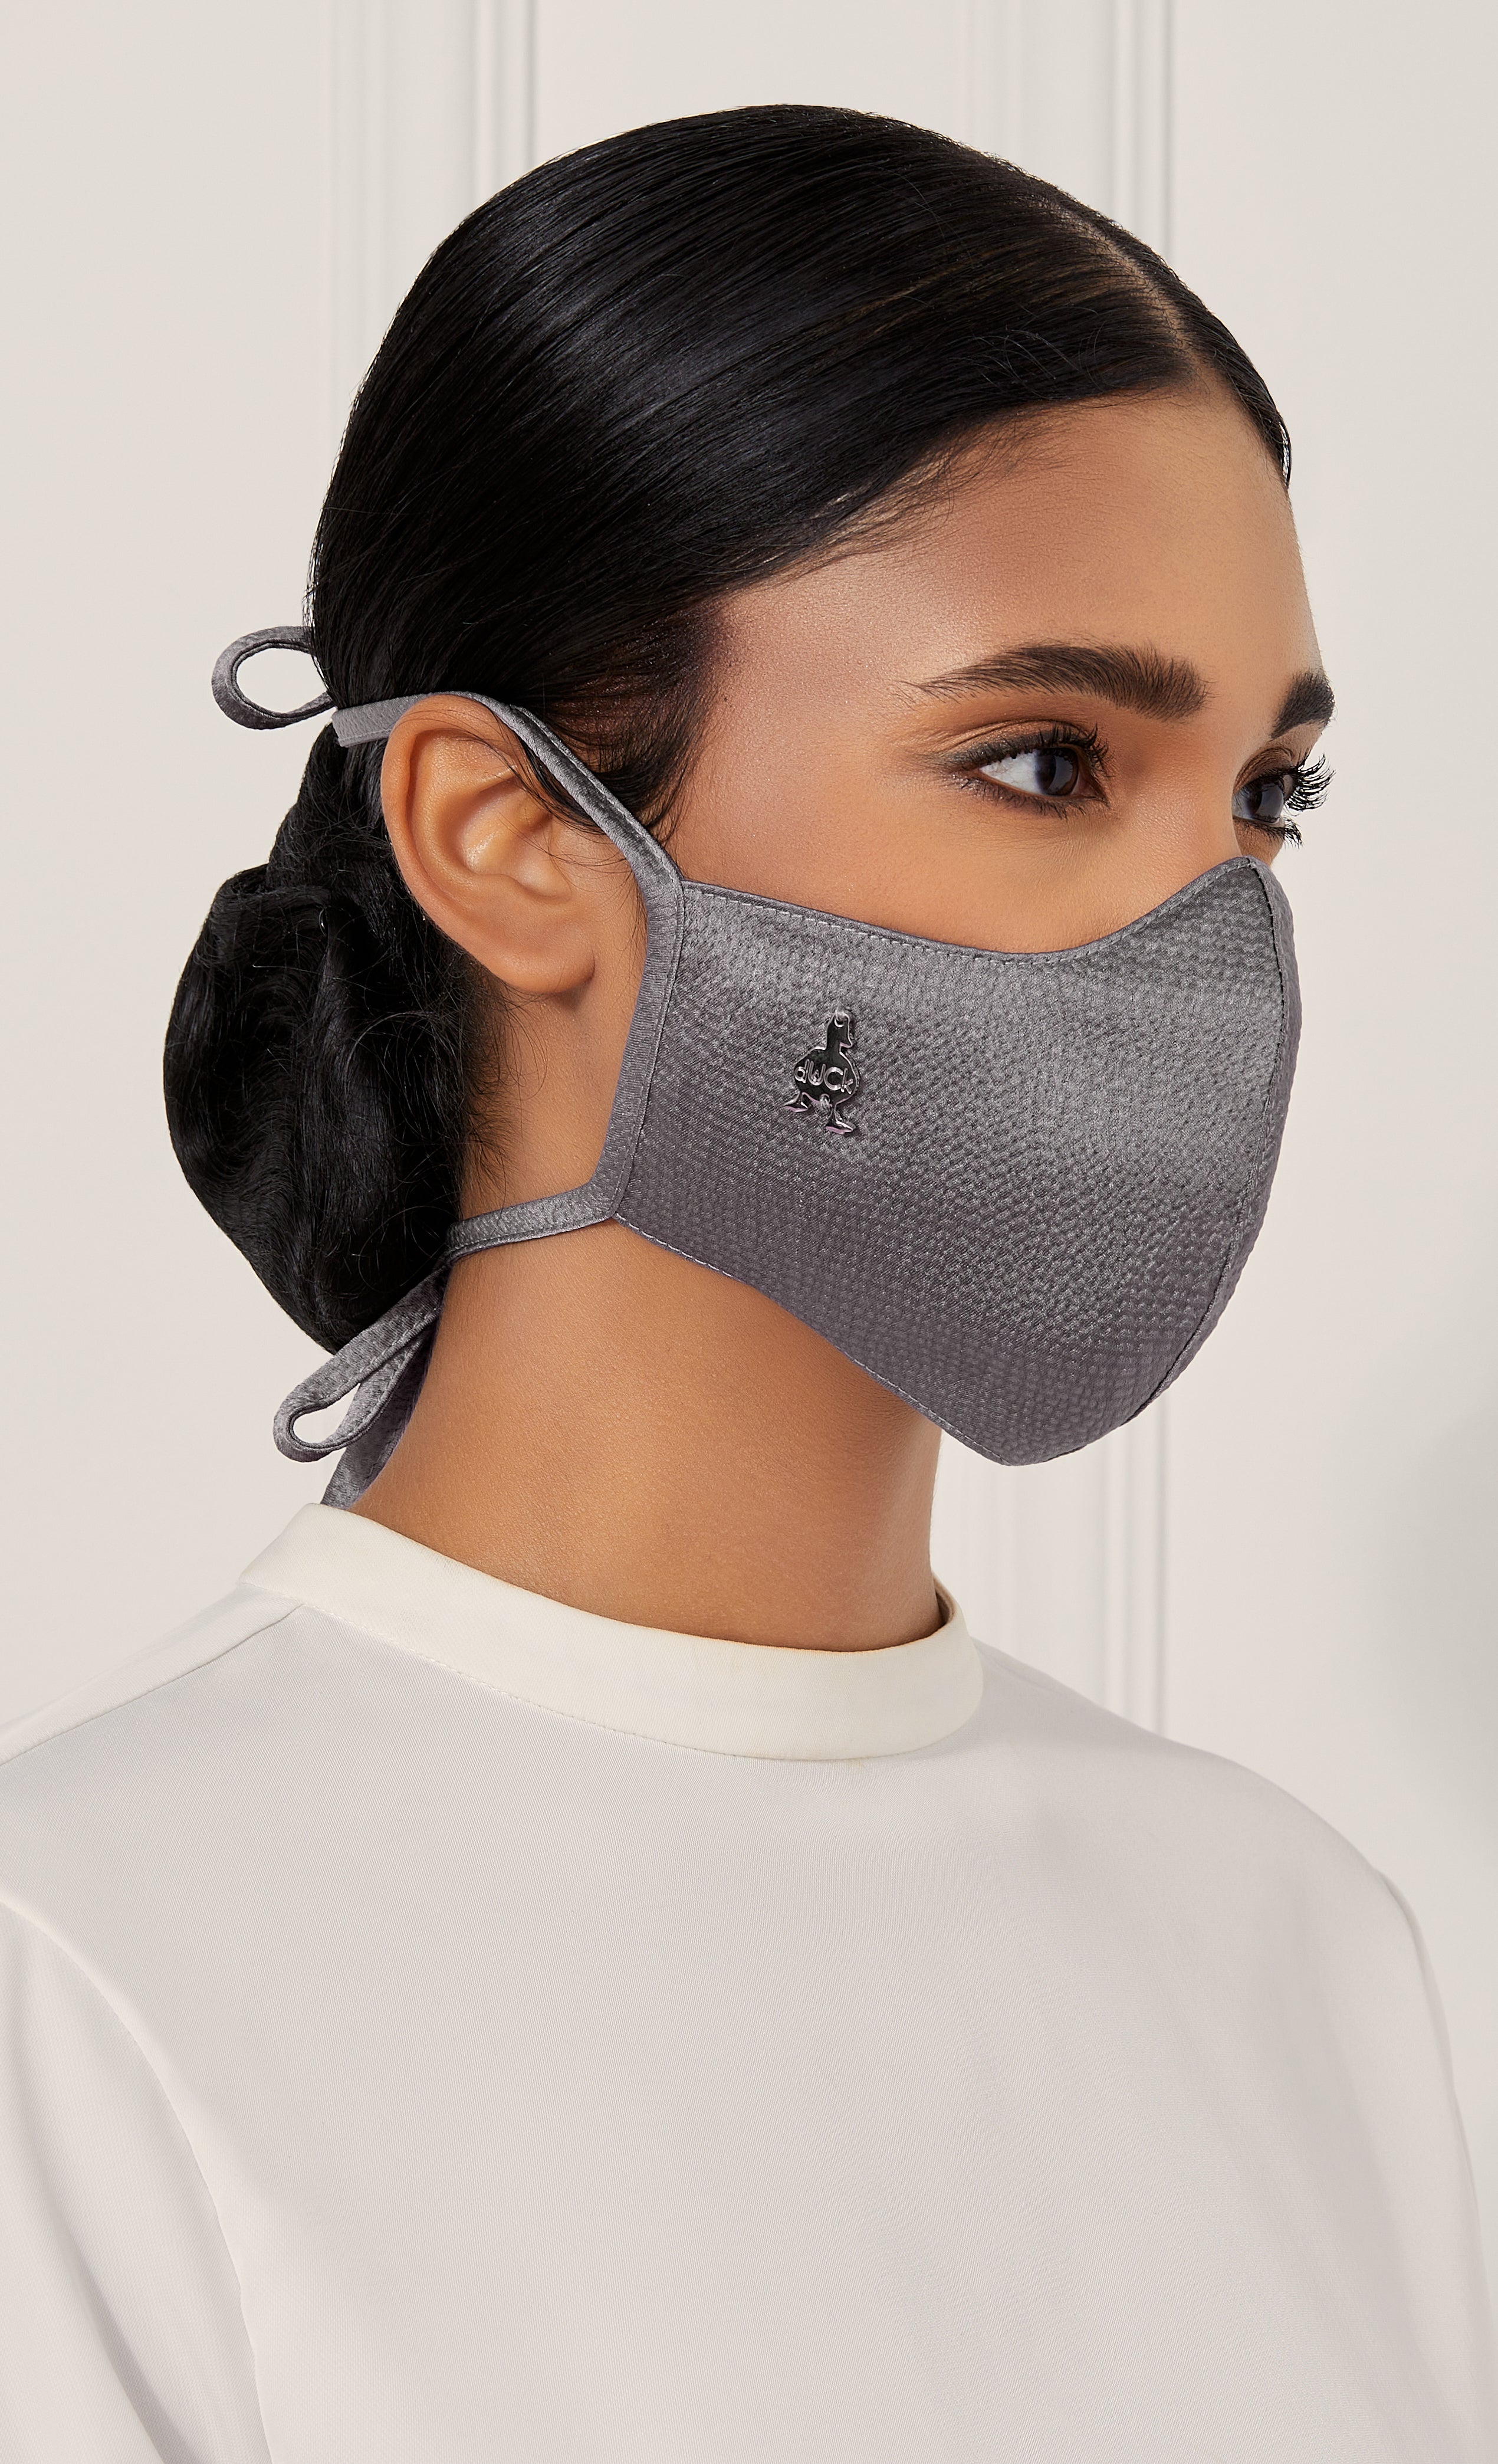 Woven Face Mask (Tie-back) in Silver Sprinkle